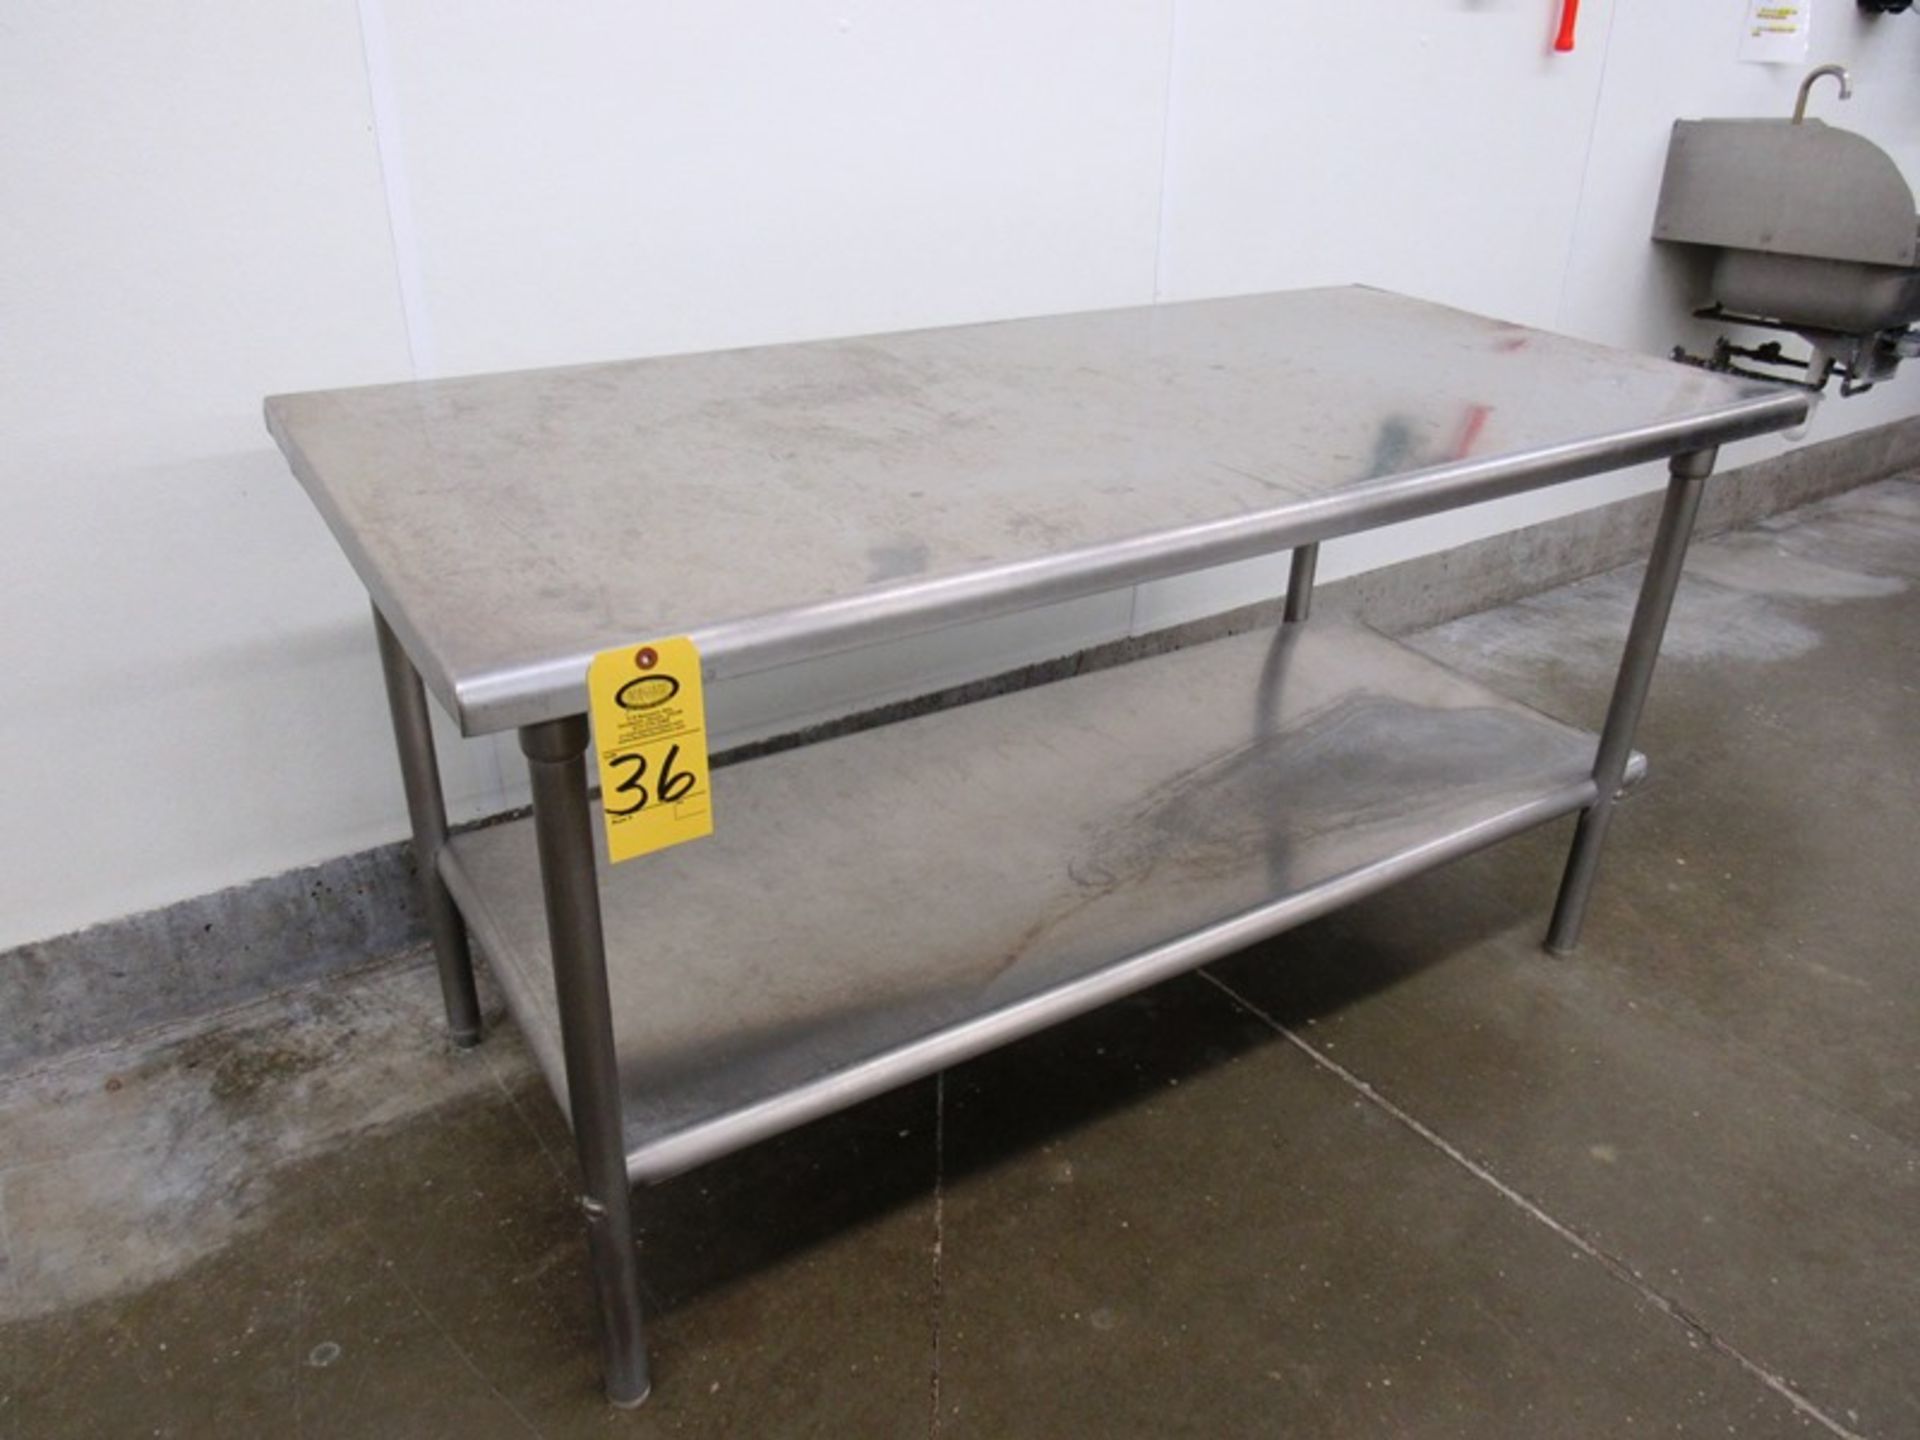 Stainless Steel Table, 30" W X 64" L X 33" T with bottom shelf (Removal Begins July 5th) Loading Fee